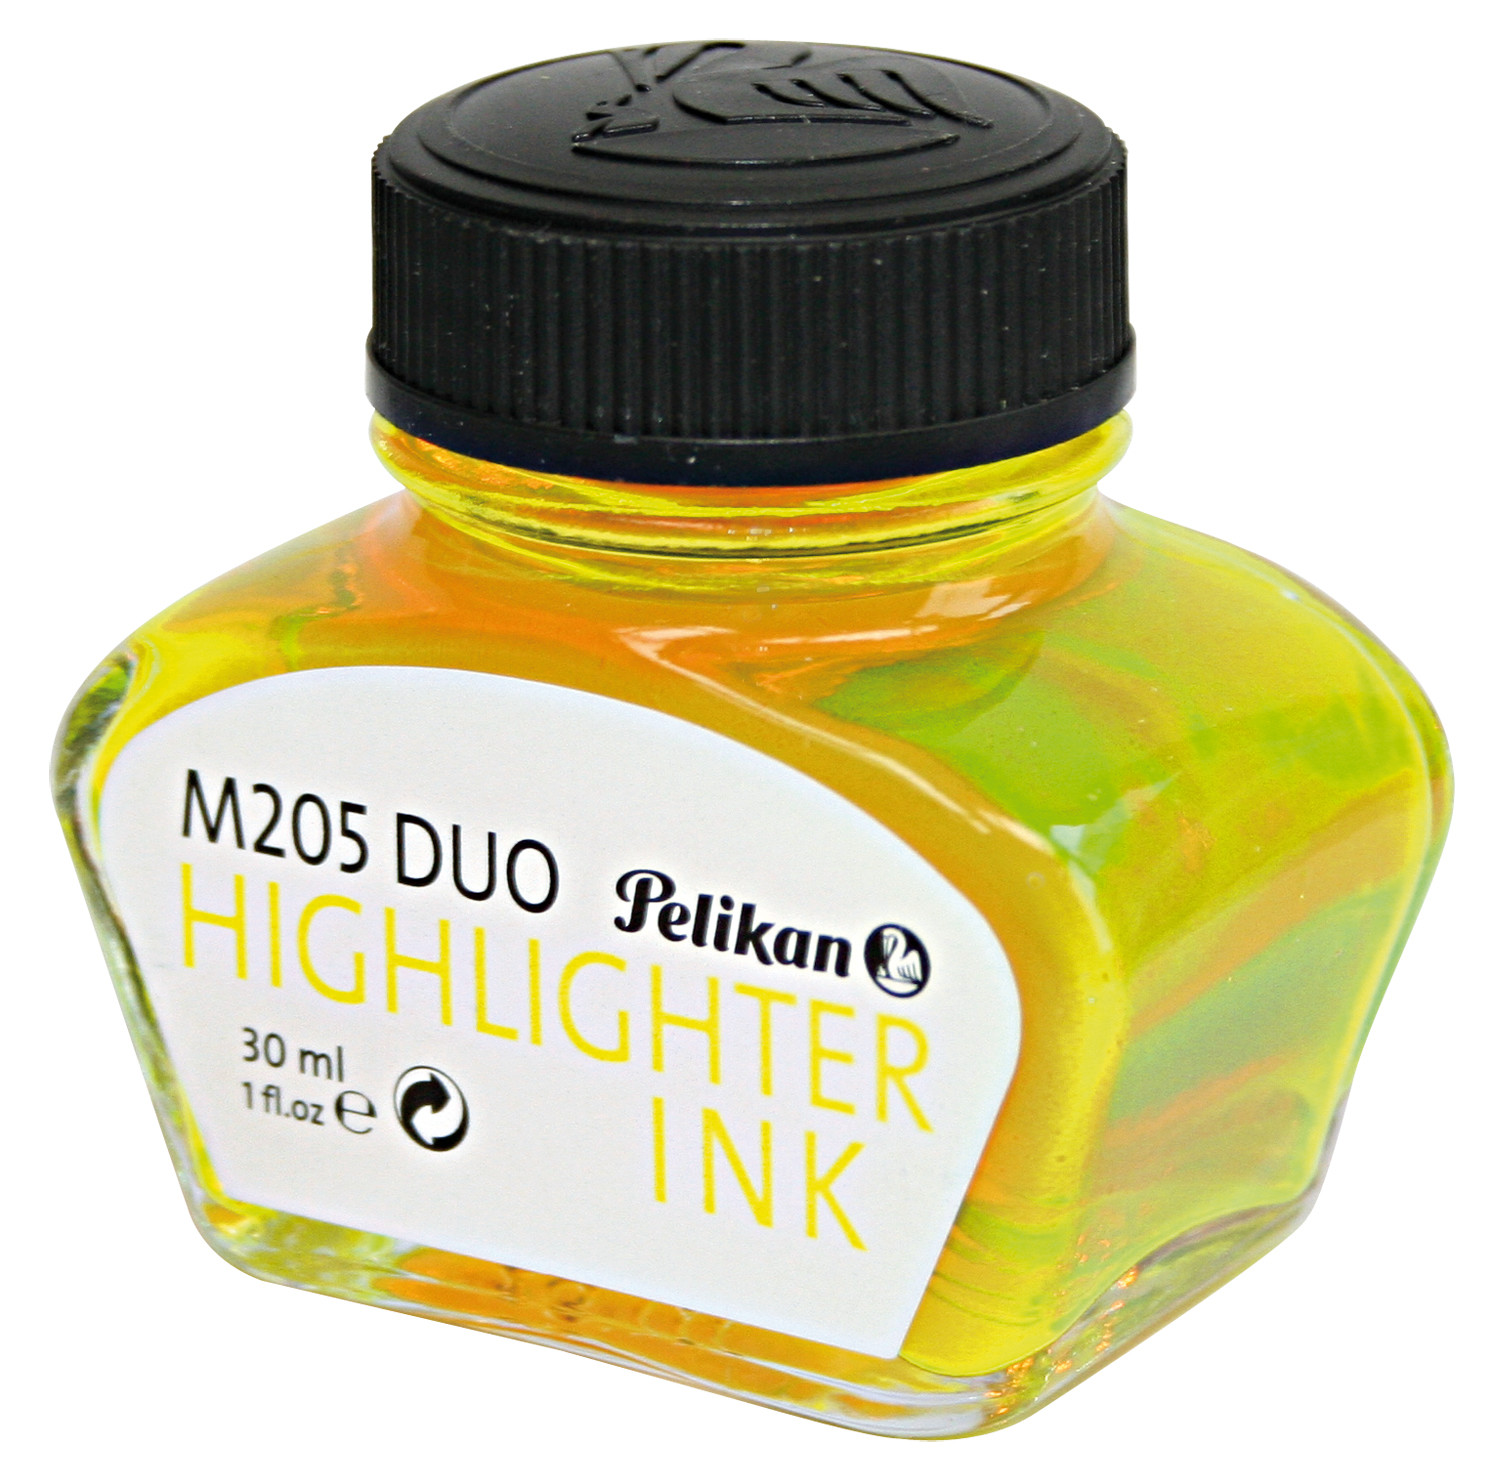 M205 Duo Highlighter Ink Bright Yellow, Glass 30ml